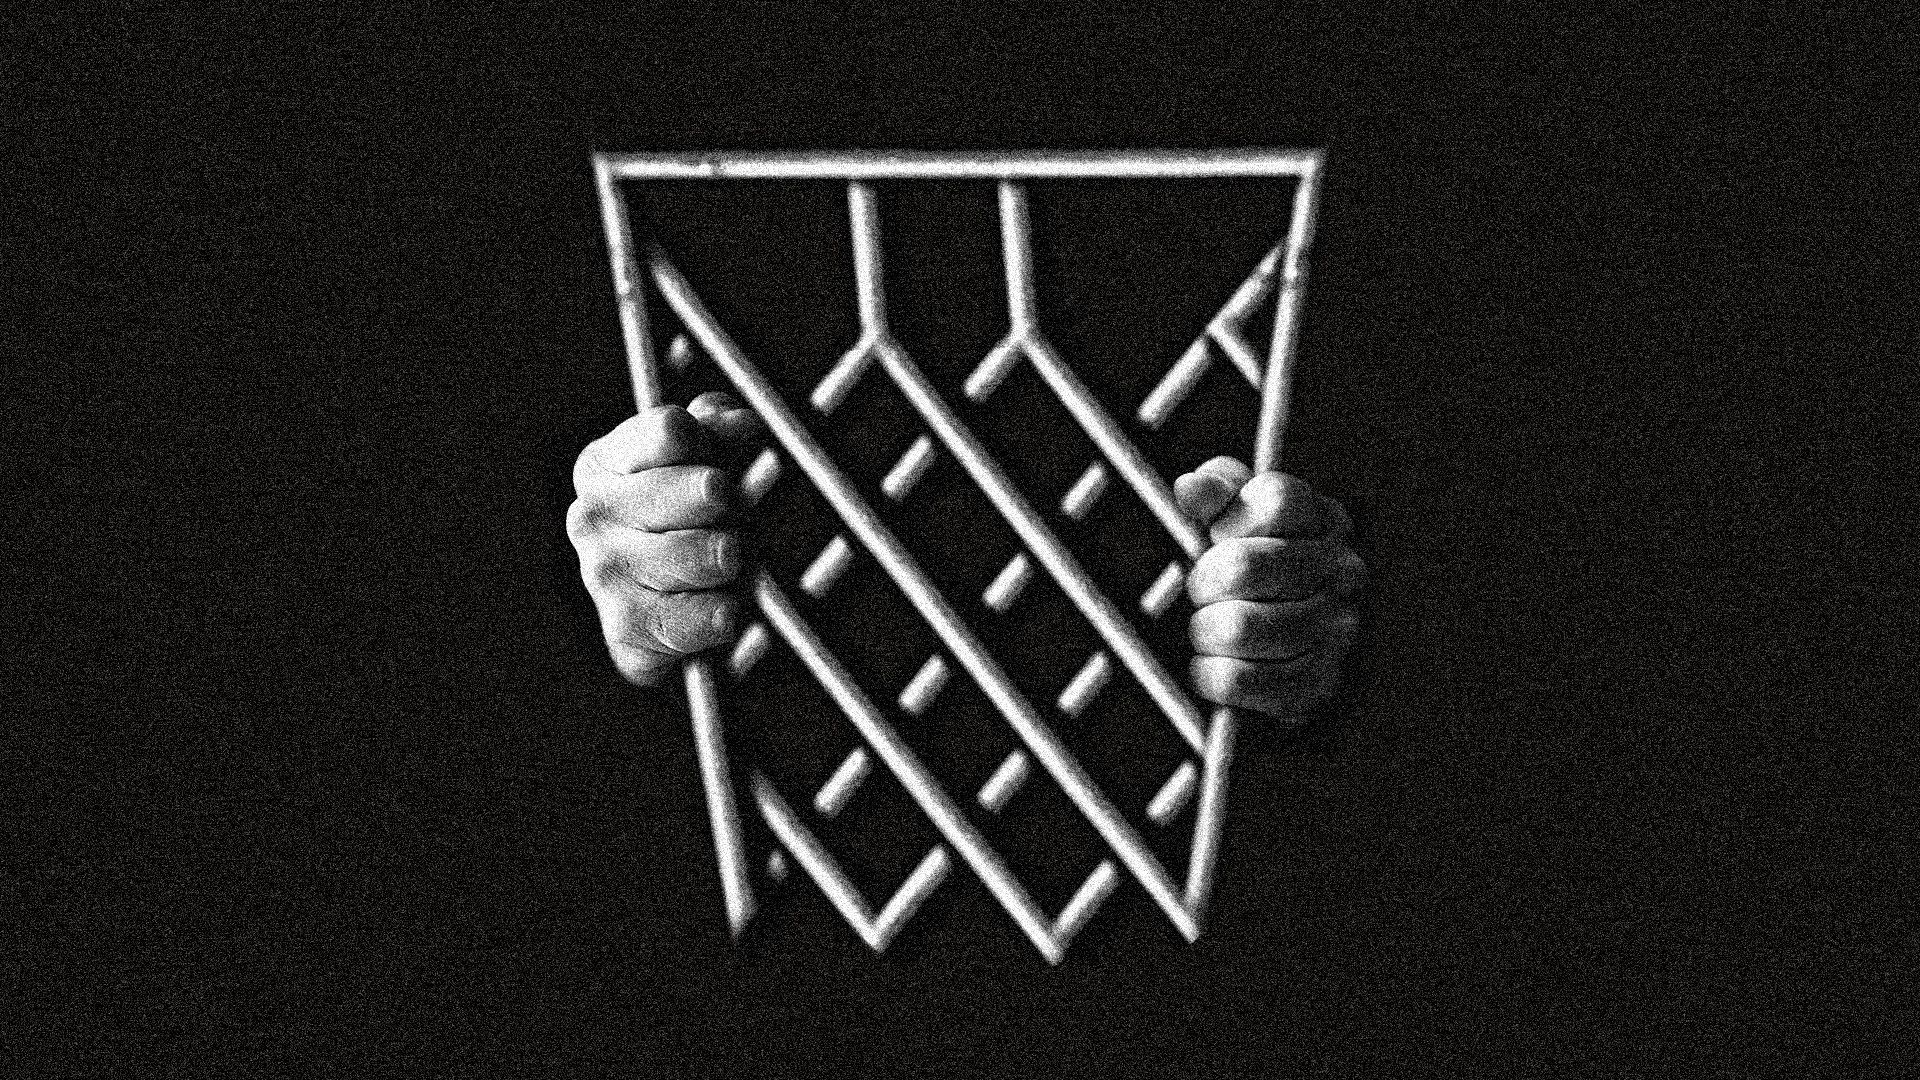 This illustration shows a metal basketball hoop being held like jail bars by two hands.